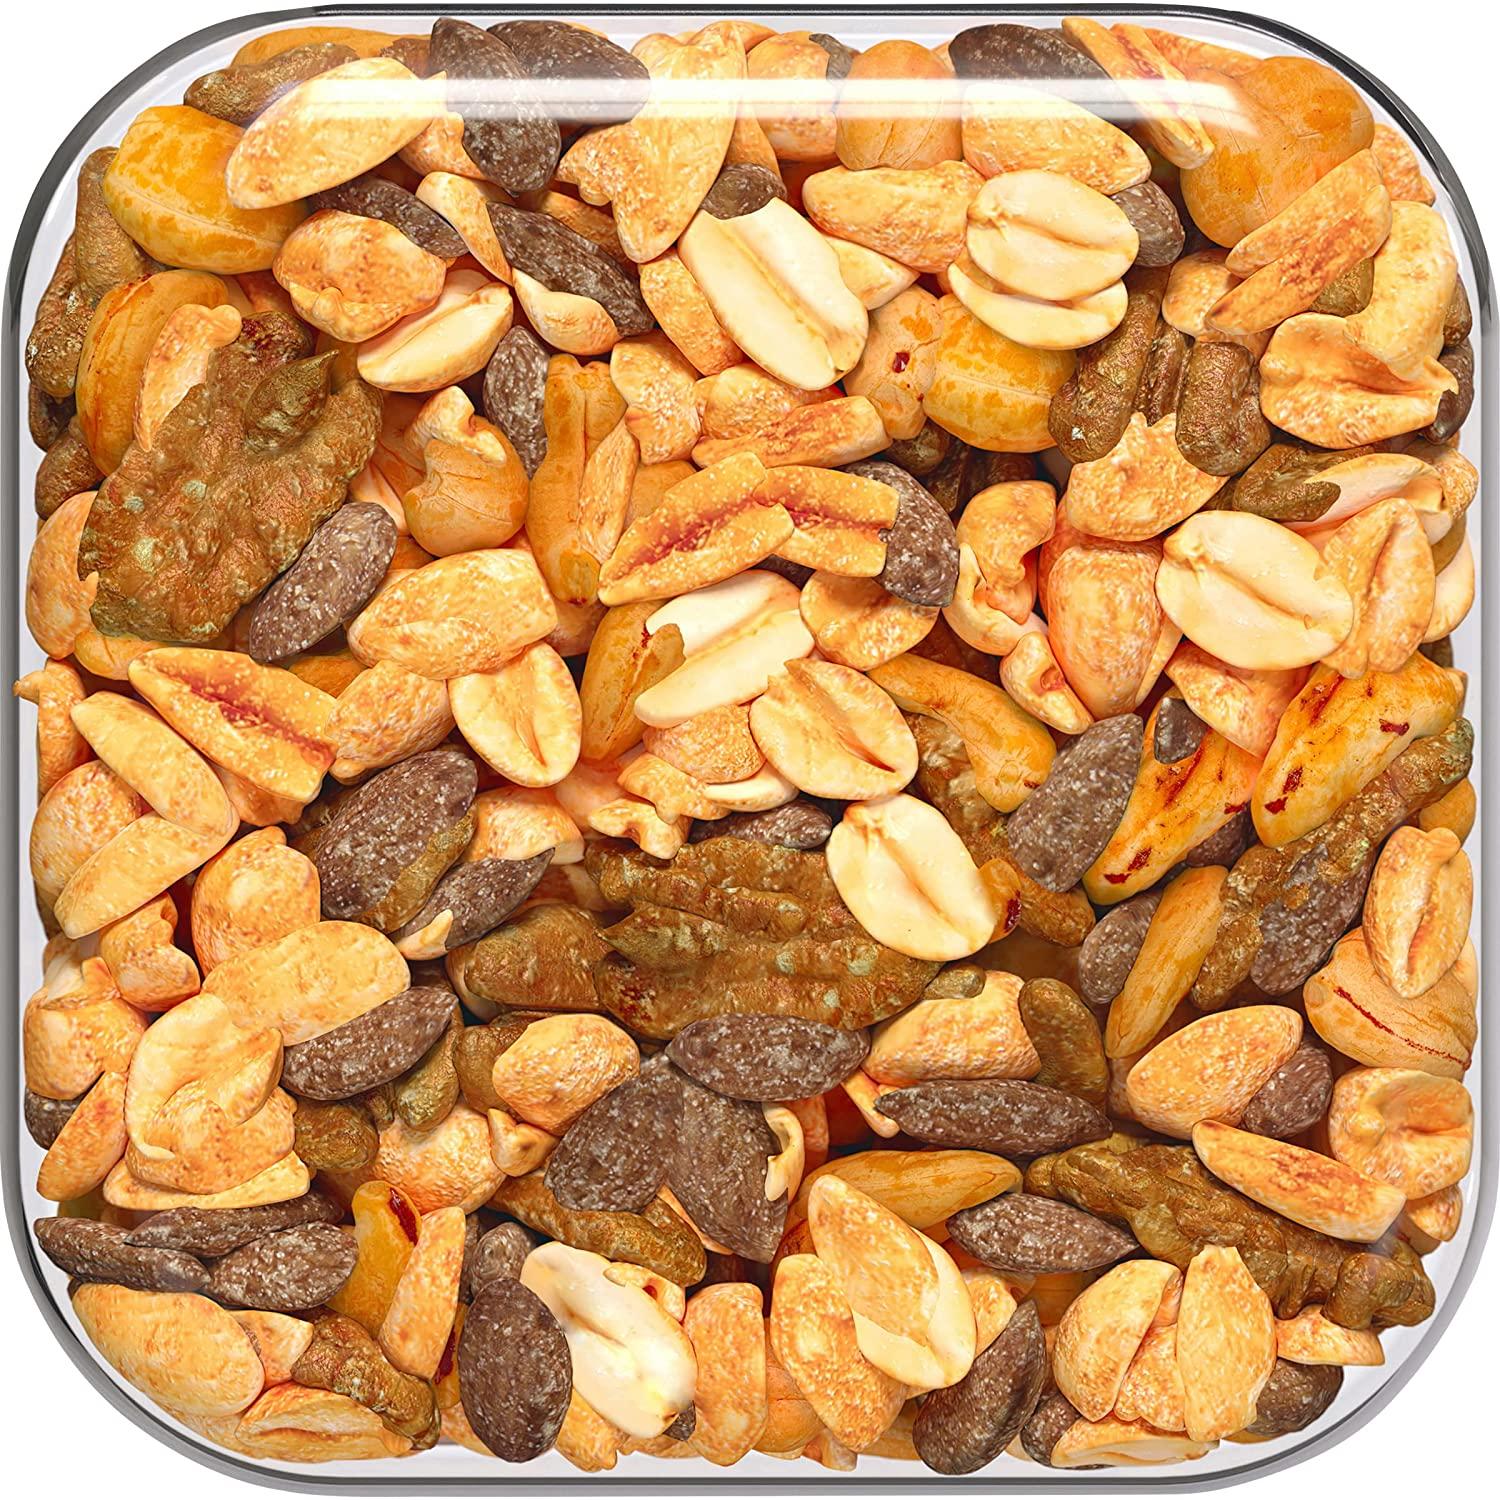 Fisher Snack Honey Roasted Mixed Nuts with Peanuts, 24 Ounces